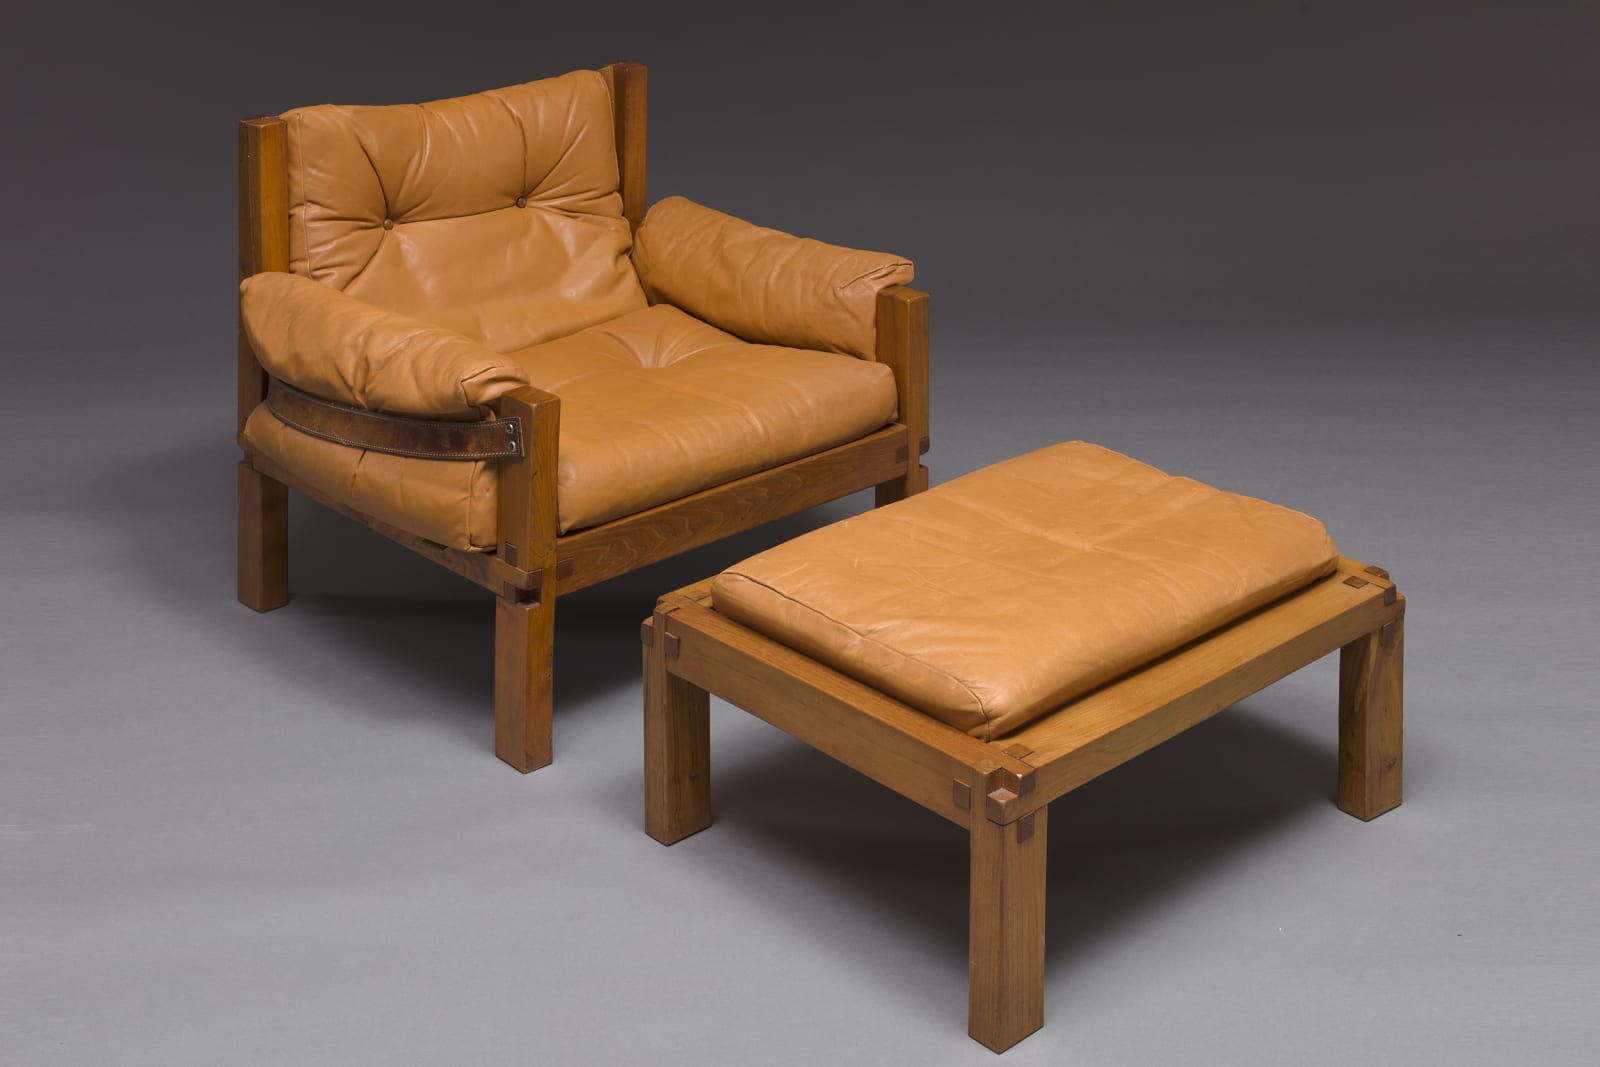 Pierre Chapo, S15 Armchair and S20 Ottoman, 1966-67